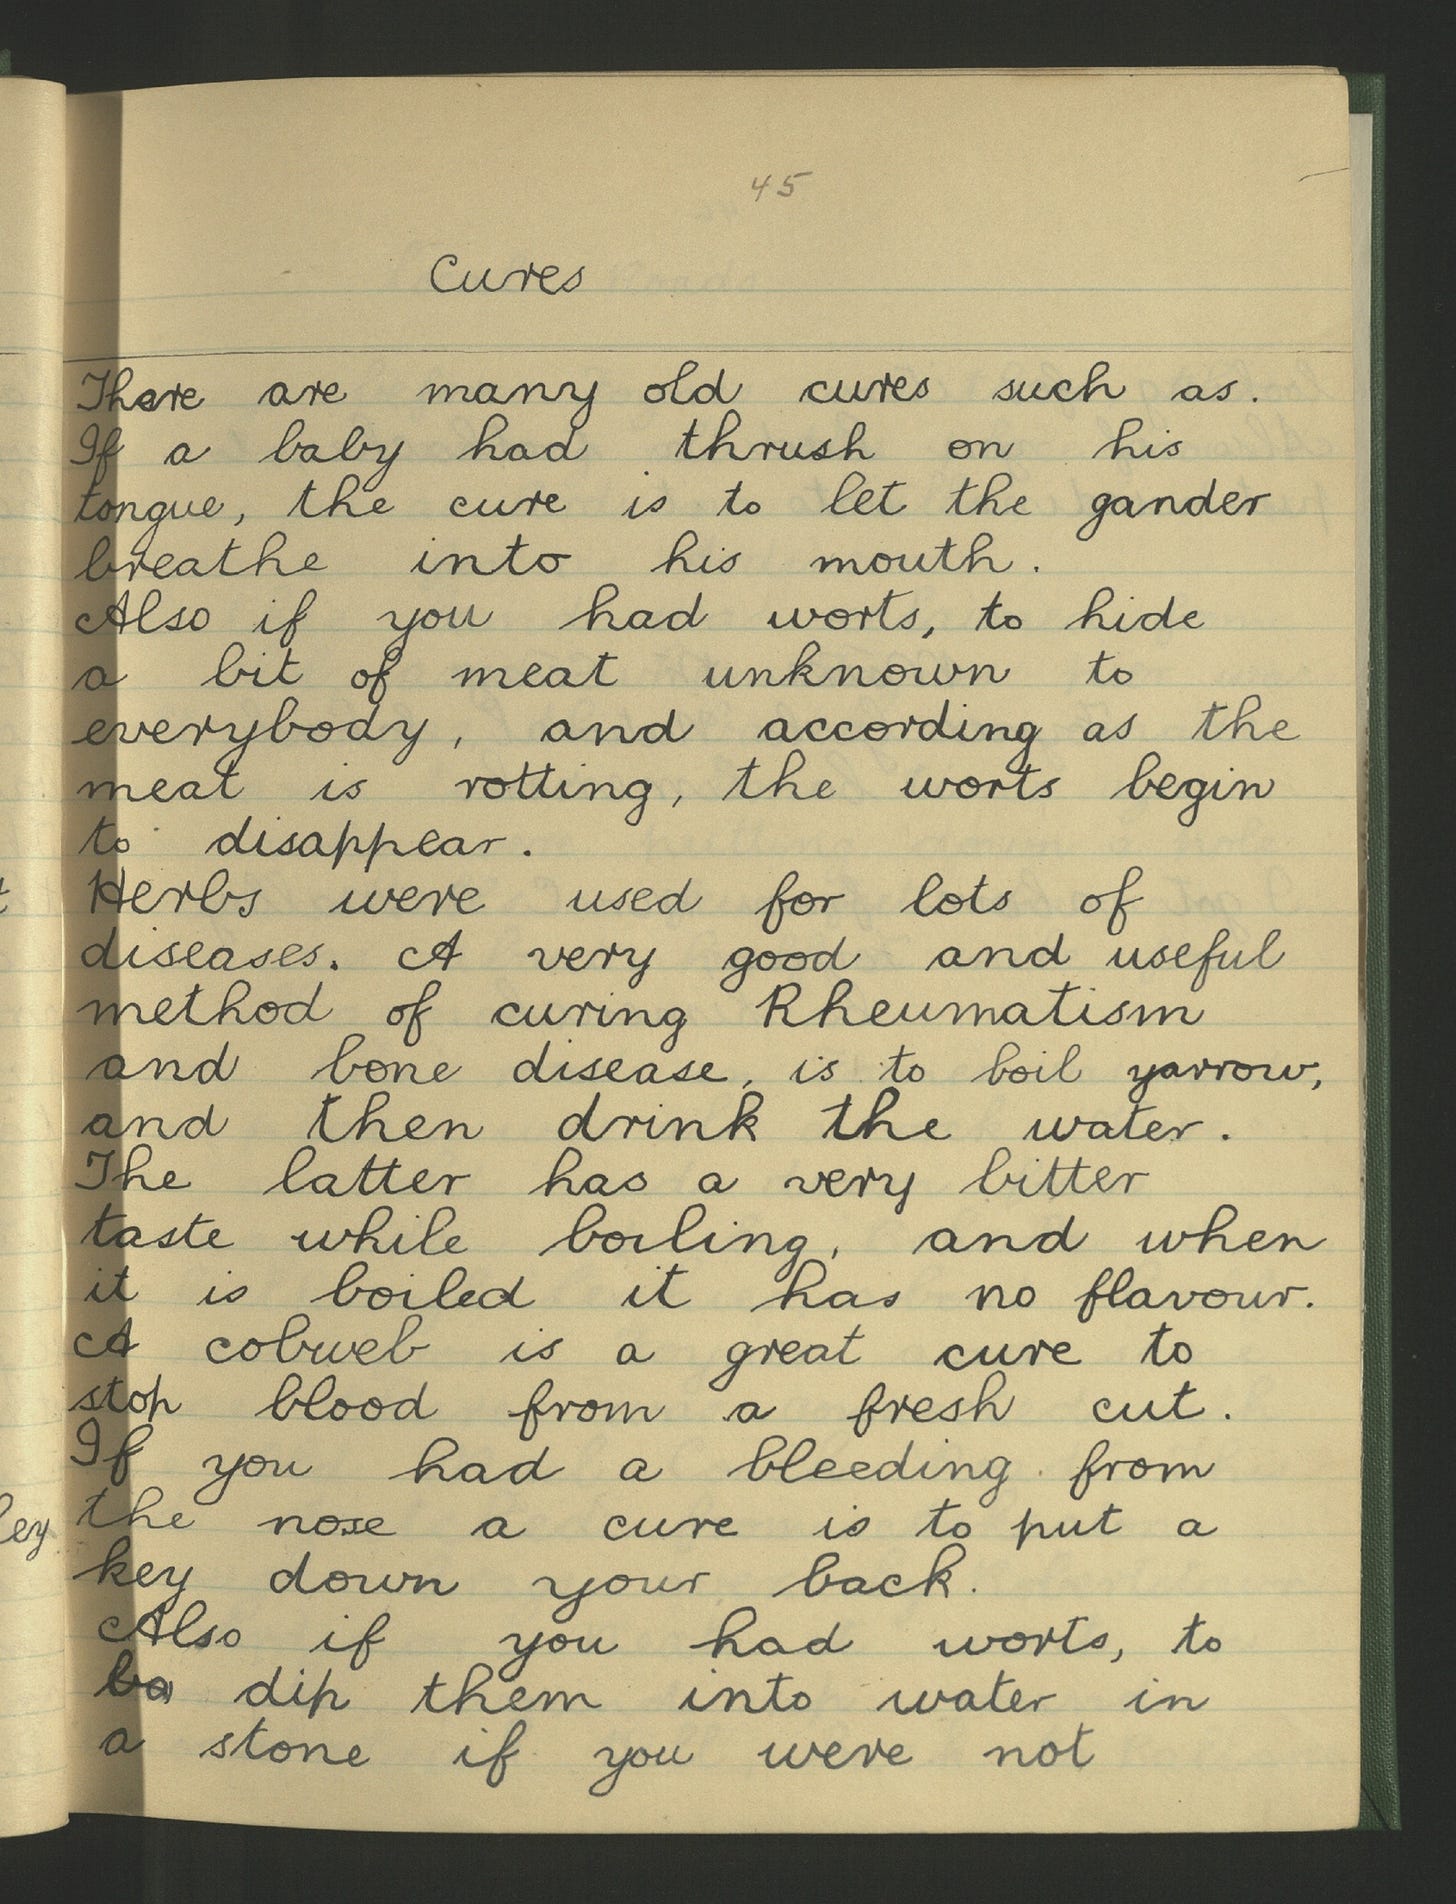 A handwritten page of beautiful cursive writing detailing outlandish 'cures' of the early 20th century in rural Ireland